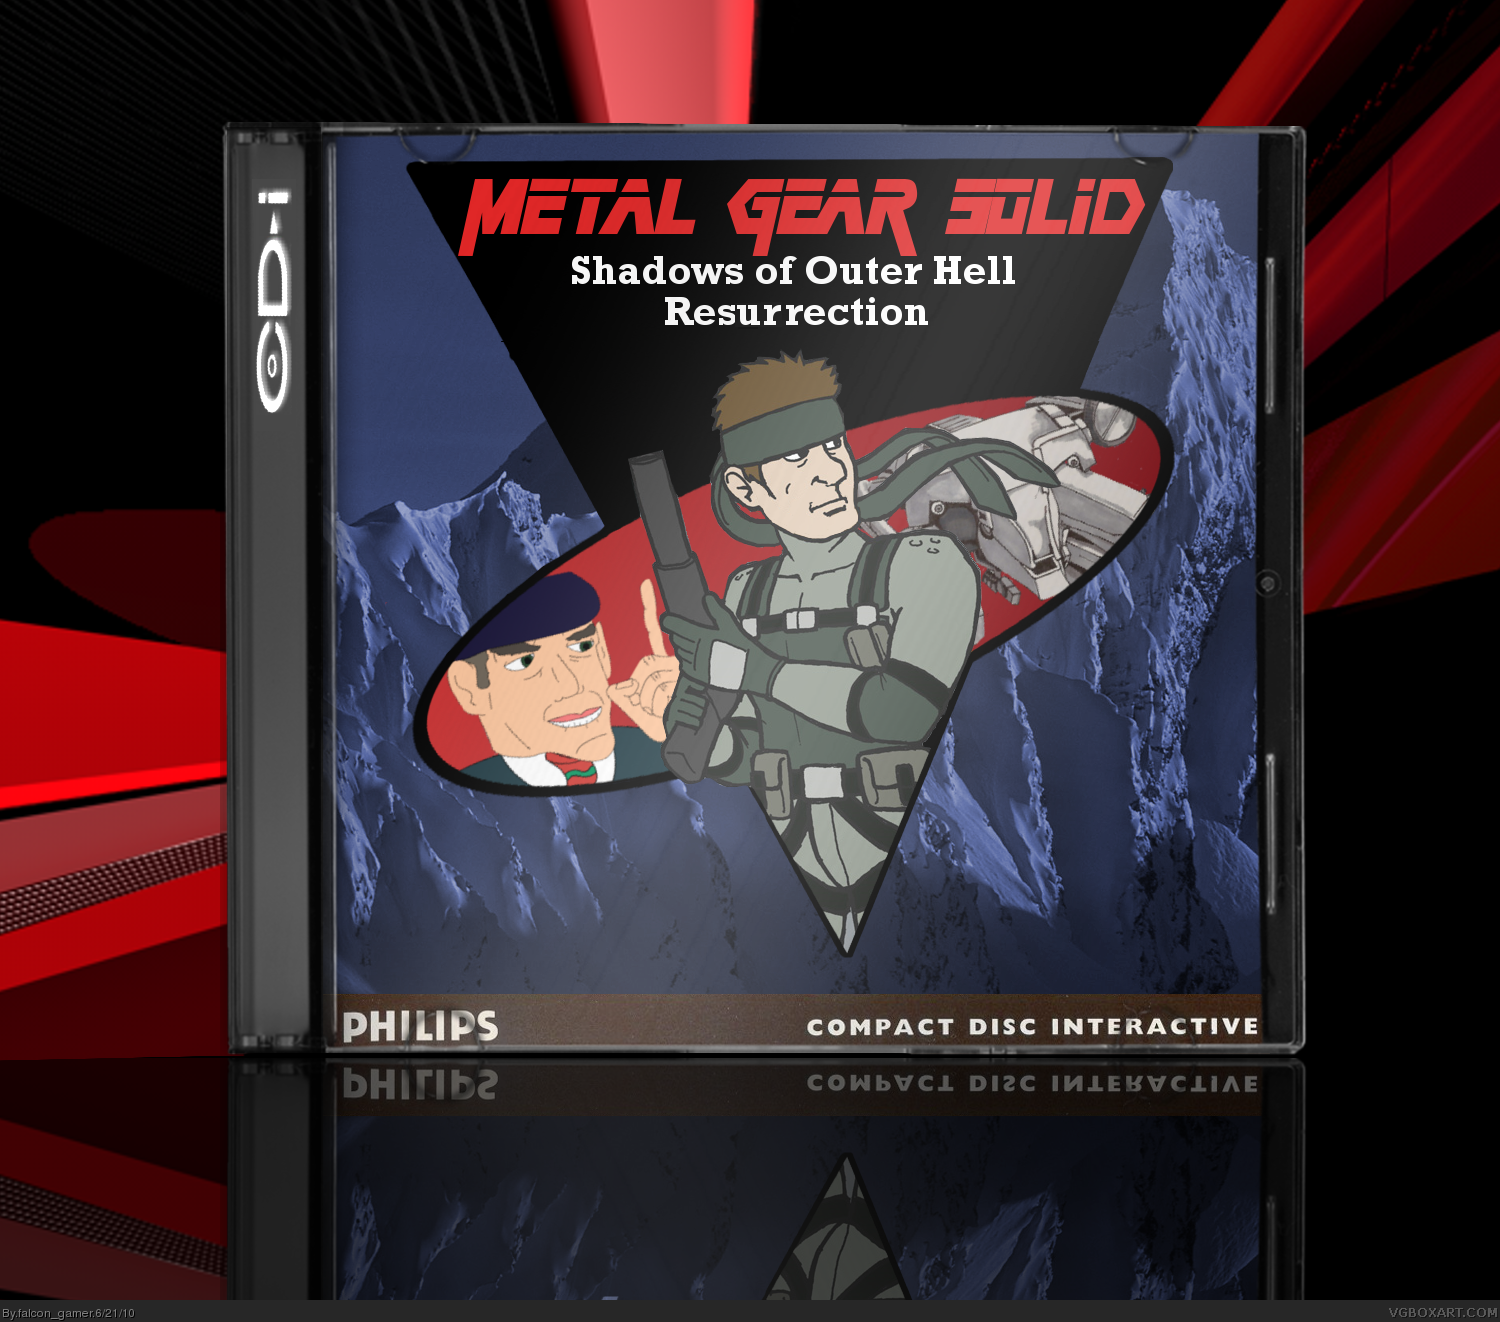 Metal Gear Solid Shadow of Outer Hell Resurrection box cover